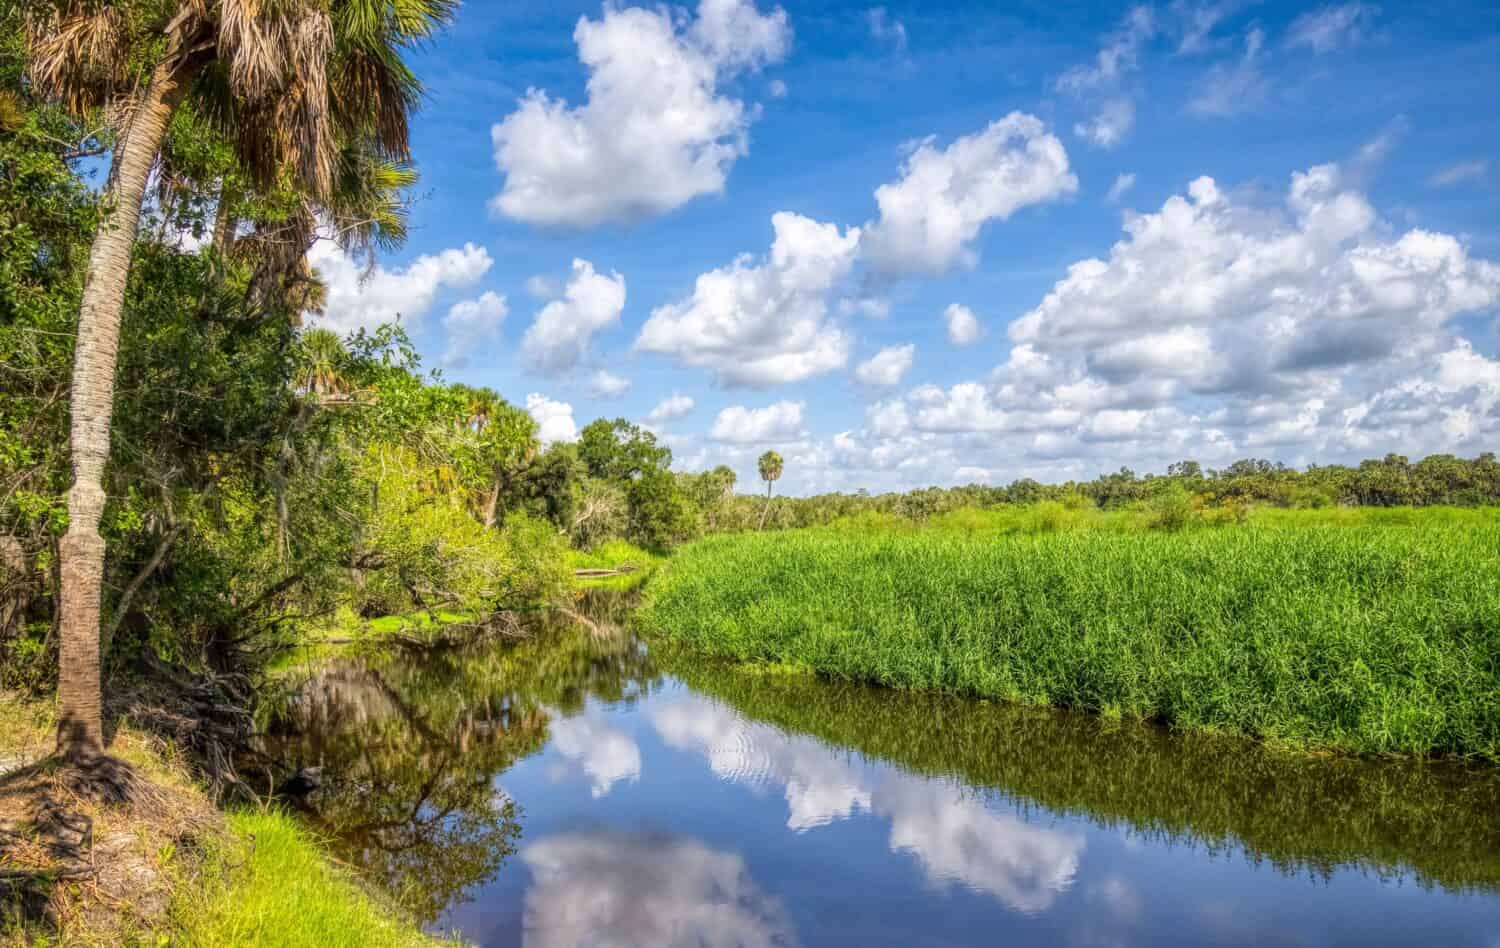 White clouds and blue sky reflecting in the Myakka River in Myakka River State Park in Sarasota Florida USA